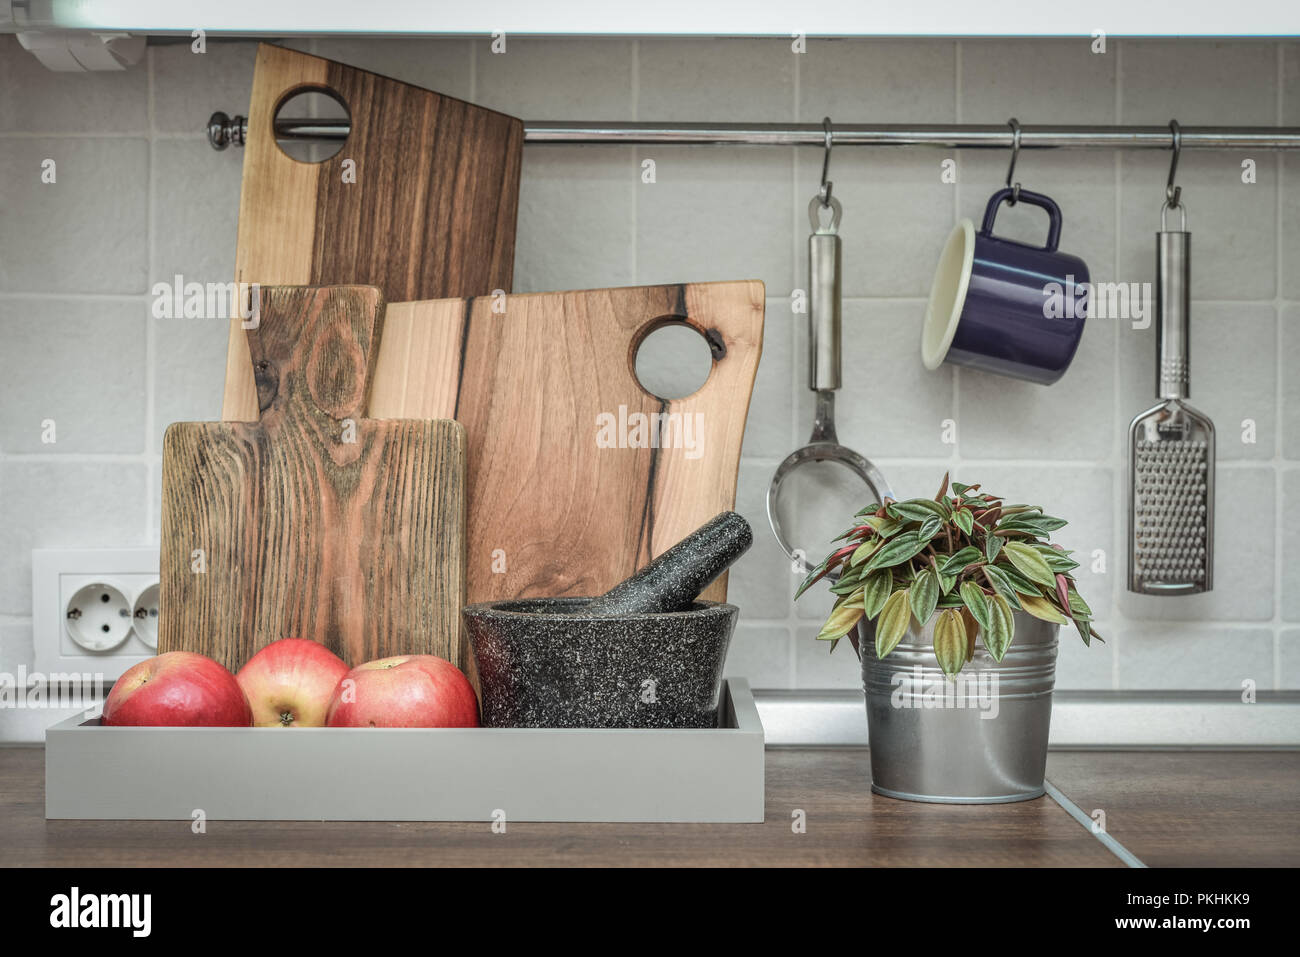 Interior of a modern domestic kitchen with cutting boards closeup Stock Photo